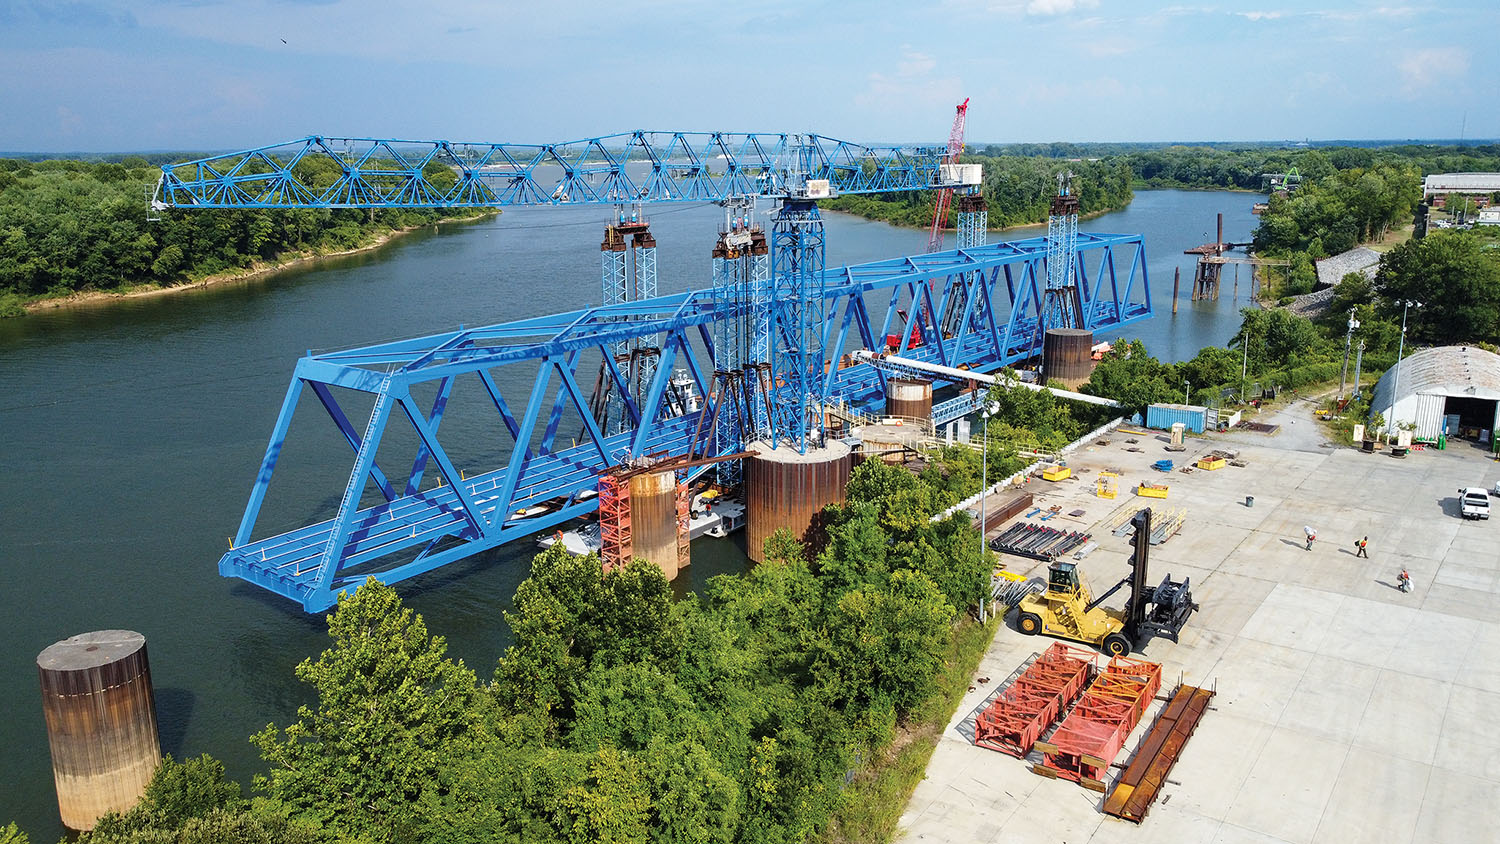 The 700-foot steel truss that comprises the main span of the new U.S. 60 bridge over the Cumberland River will be floated and lifted into place later in September. The work will cause brief closures of portions of the Tennessee and Ohio rivers and a closure of up to three days at the new bridge’s site. (Photo courtesy of American Bridge Company)